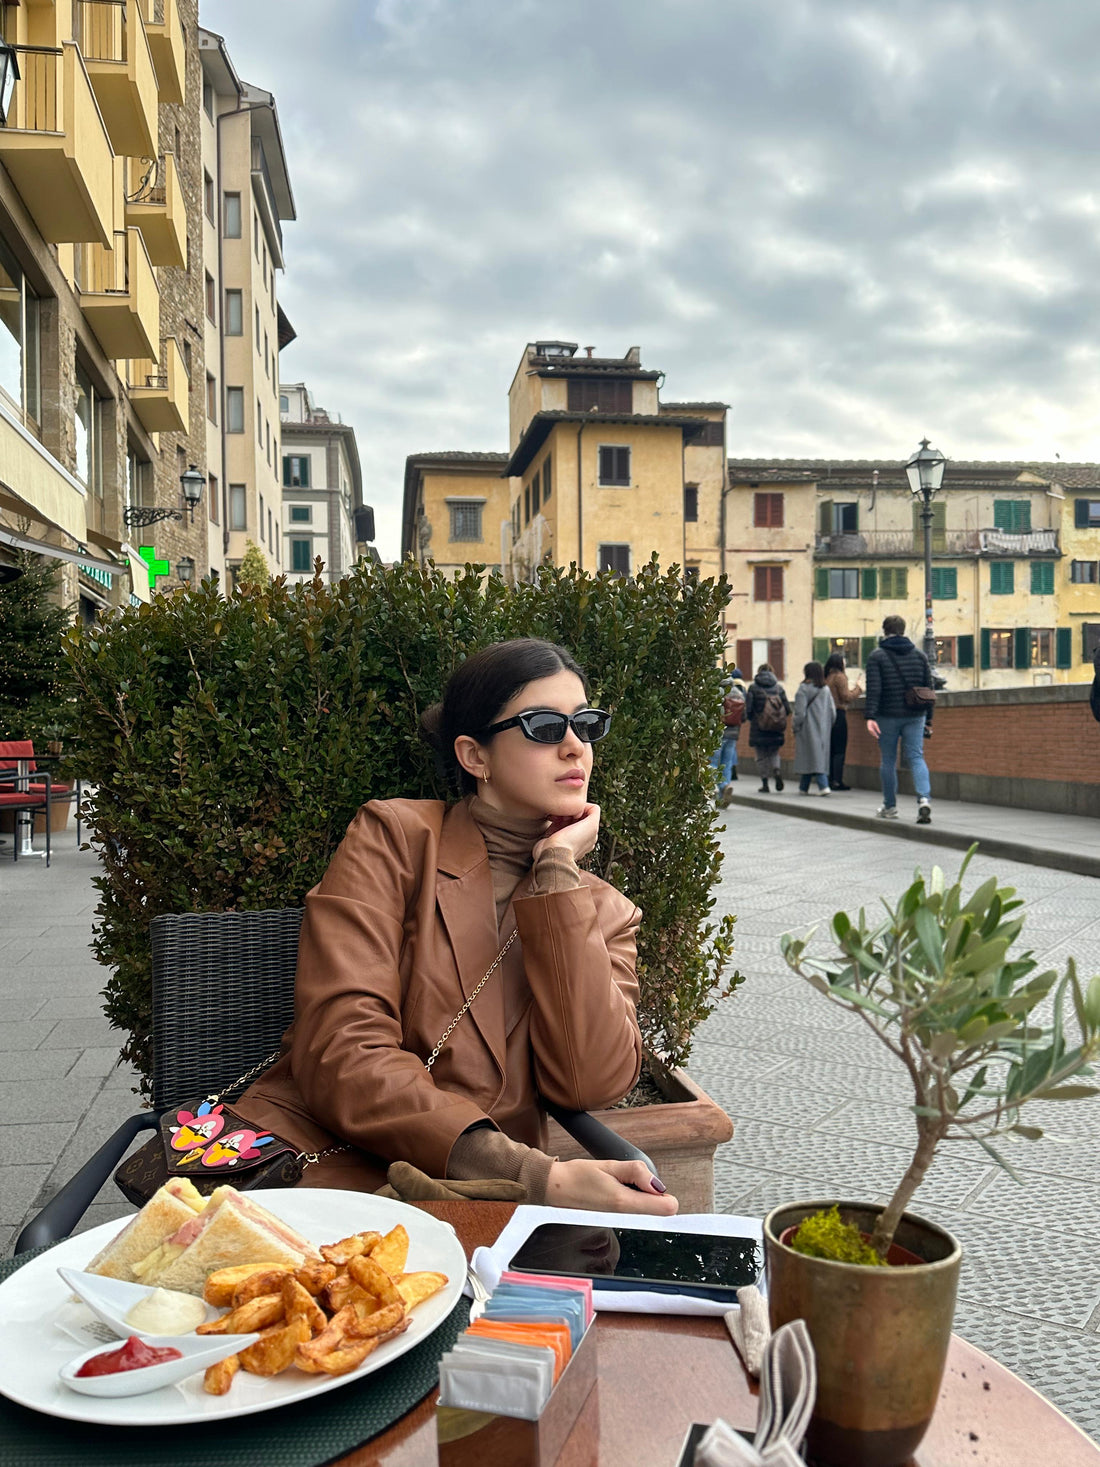 Shanaya Kapoor serving looks wearing HYDE's Black PARIS shades in Italy, the perfect travel pair!